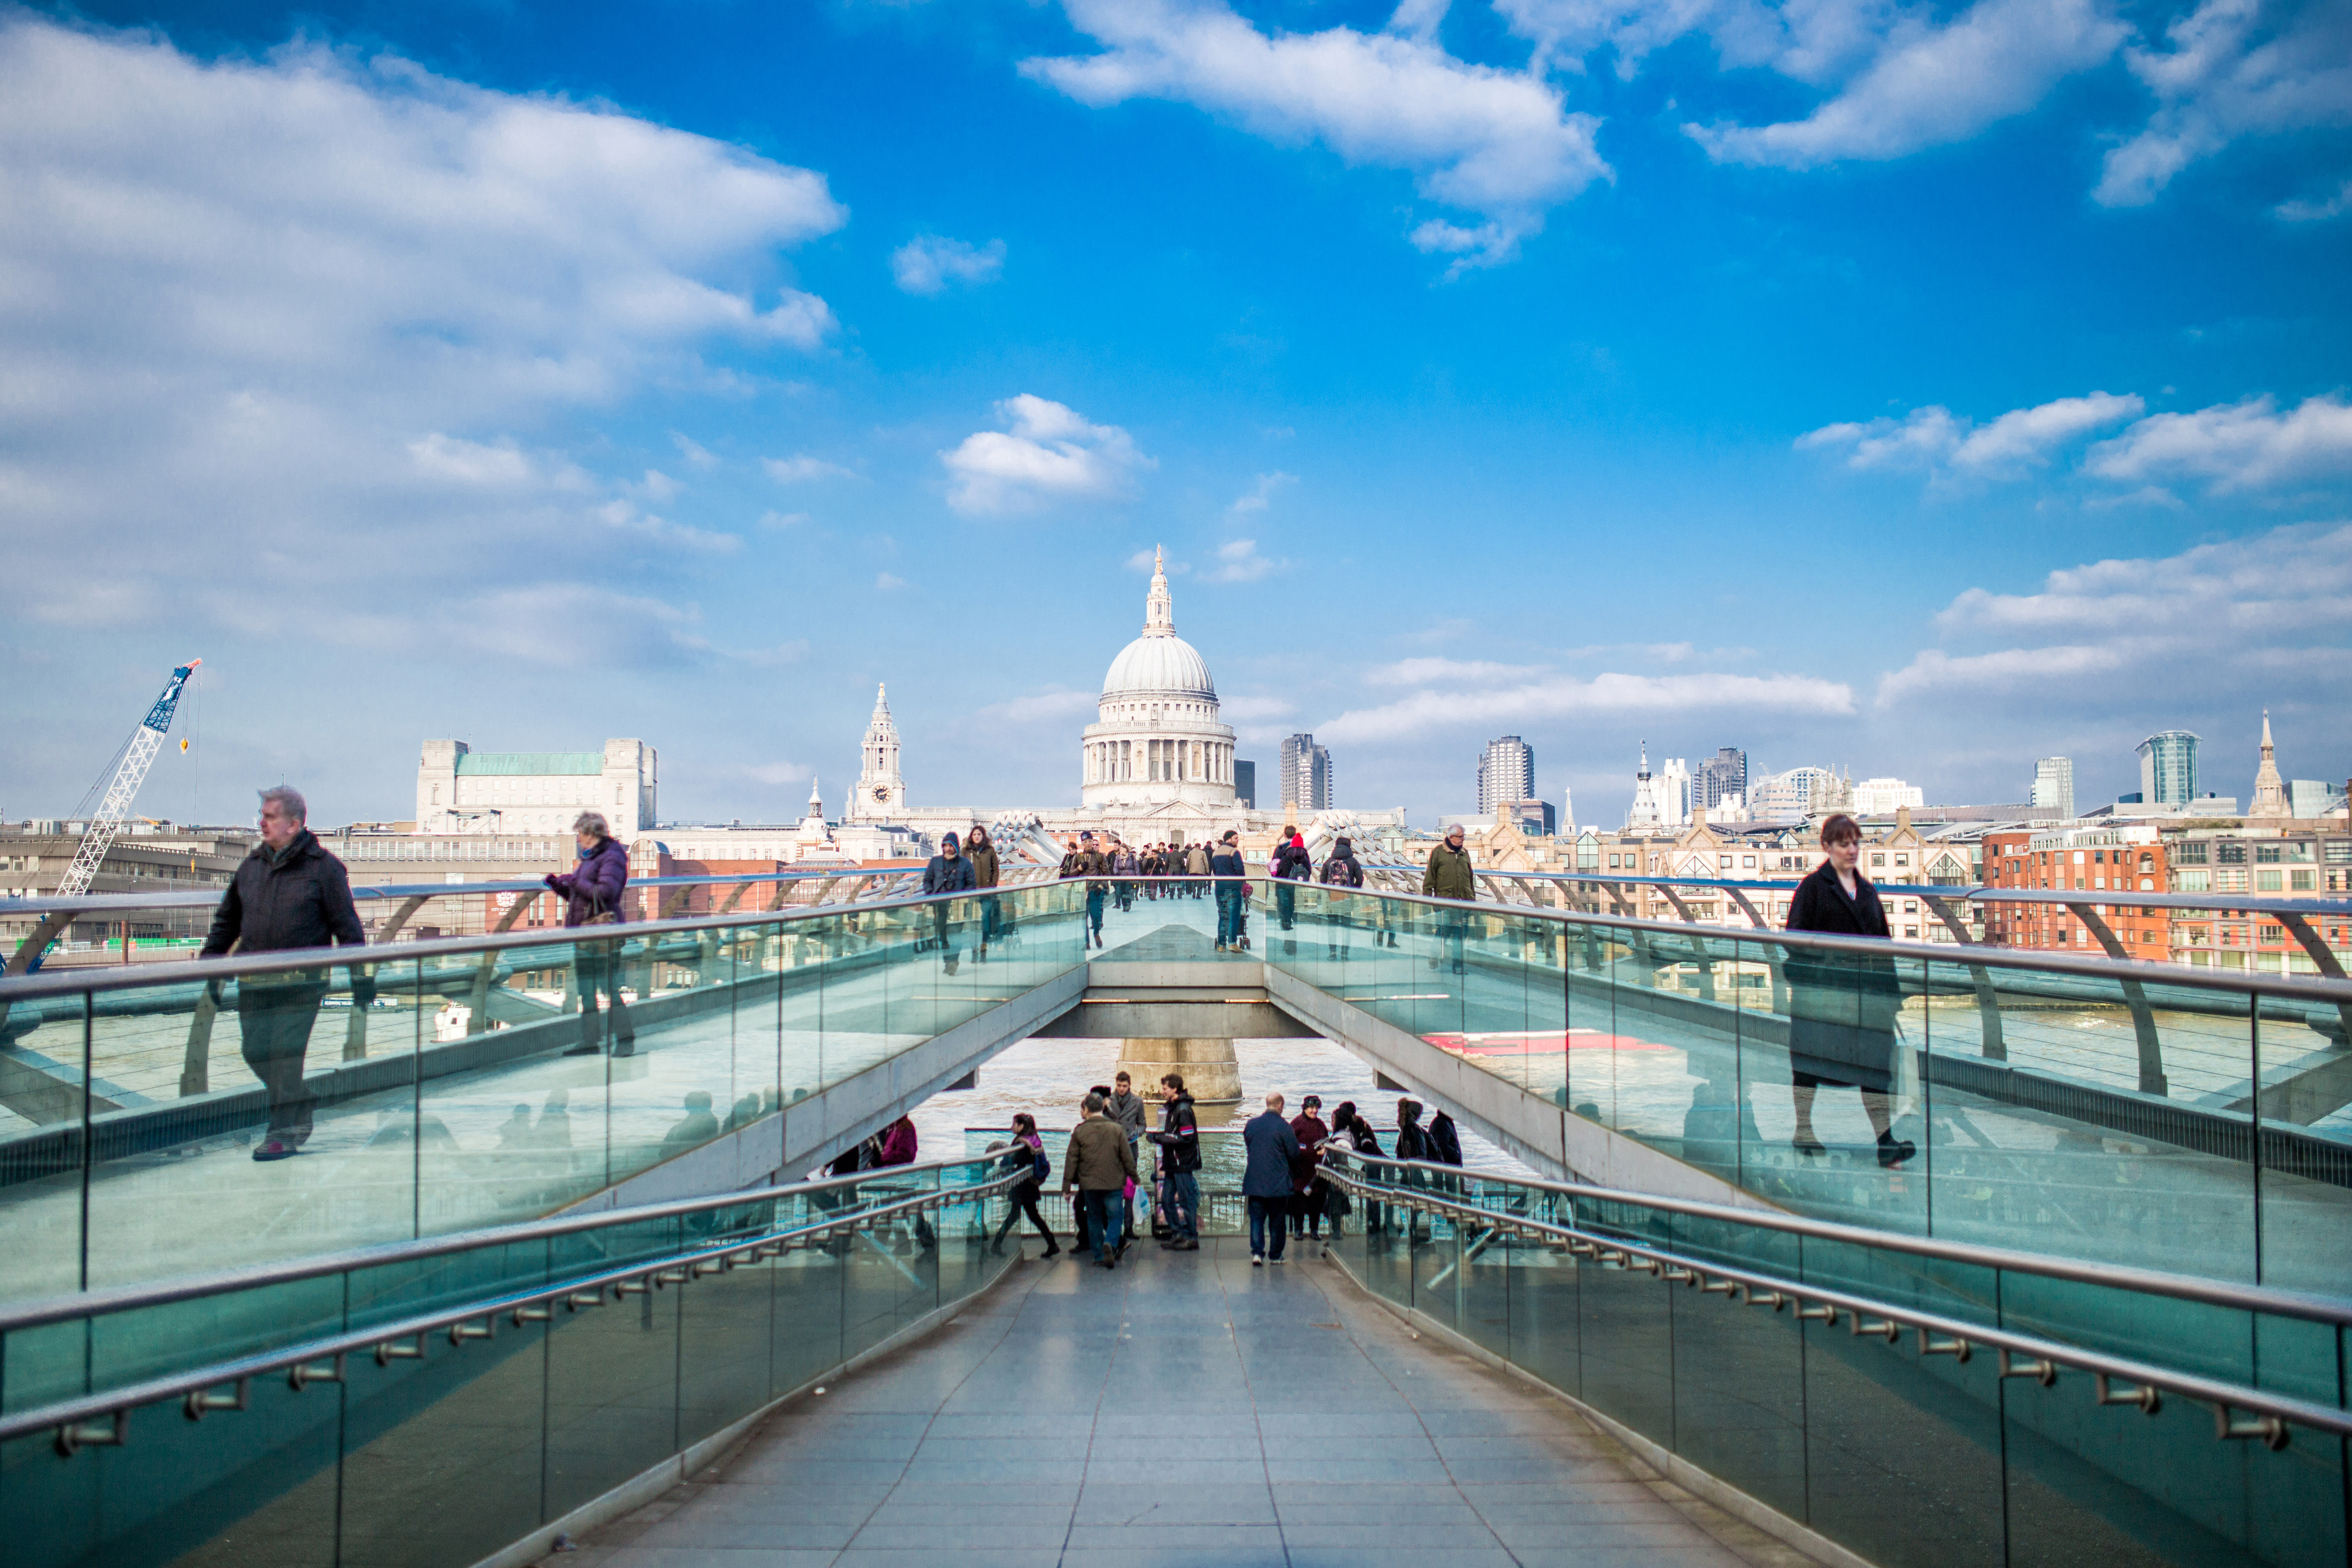 Tourists sightseeing in London, England image - Free stock photo